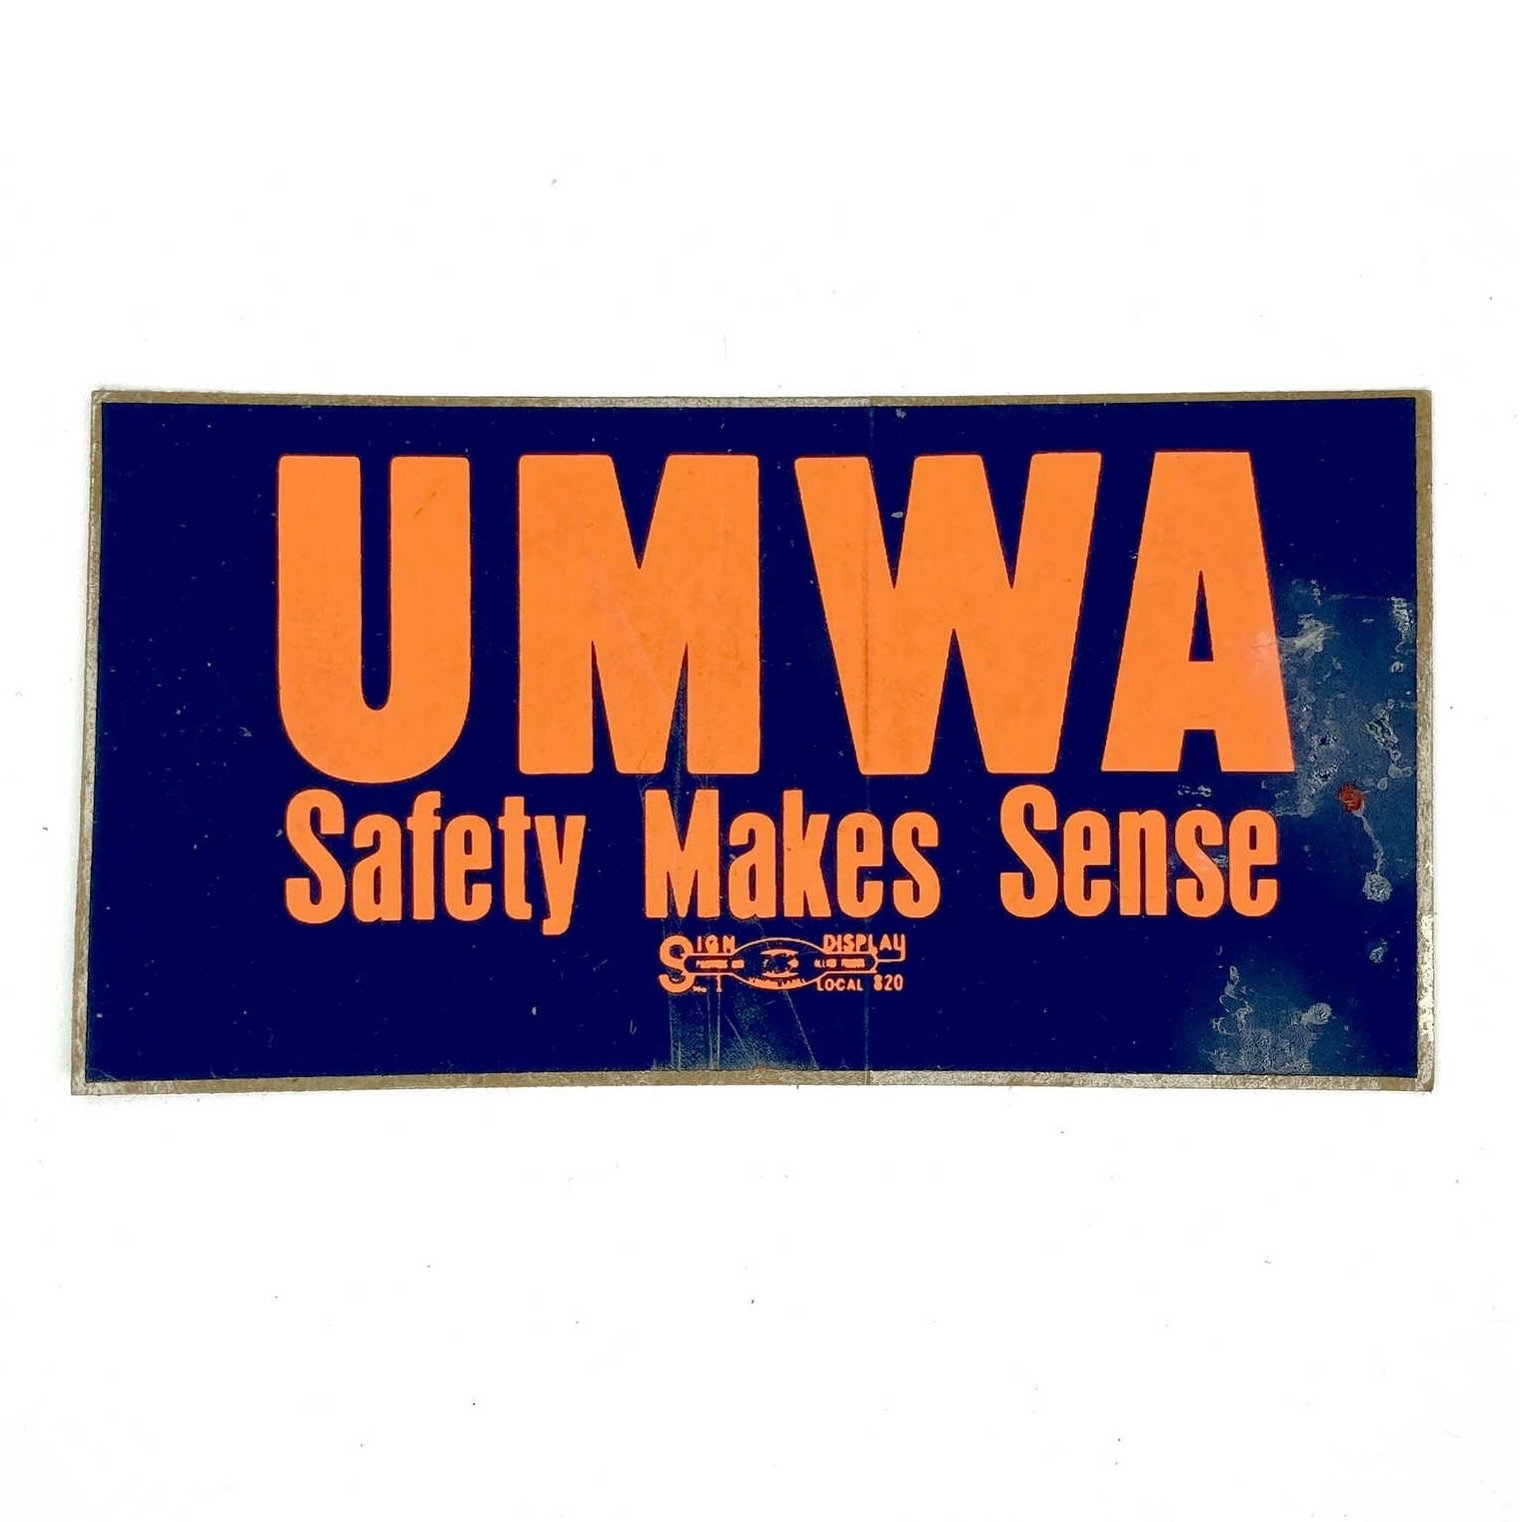 Safety Makes Sense! @umwaunion sticker from our collection, date unknown. Note the prominent &ldquo;union bug&rdquo; on this sticker, attributing the printing to the International Union of Painters and Allied Trades (IUPAT) Sign &amp; Display Workers